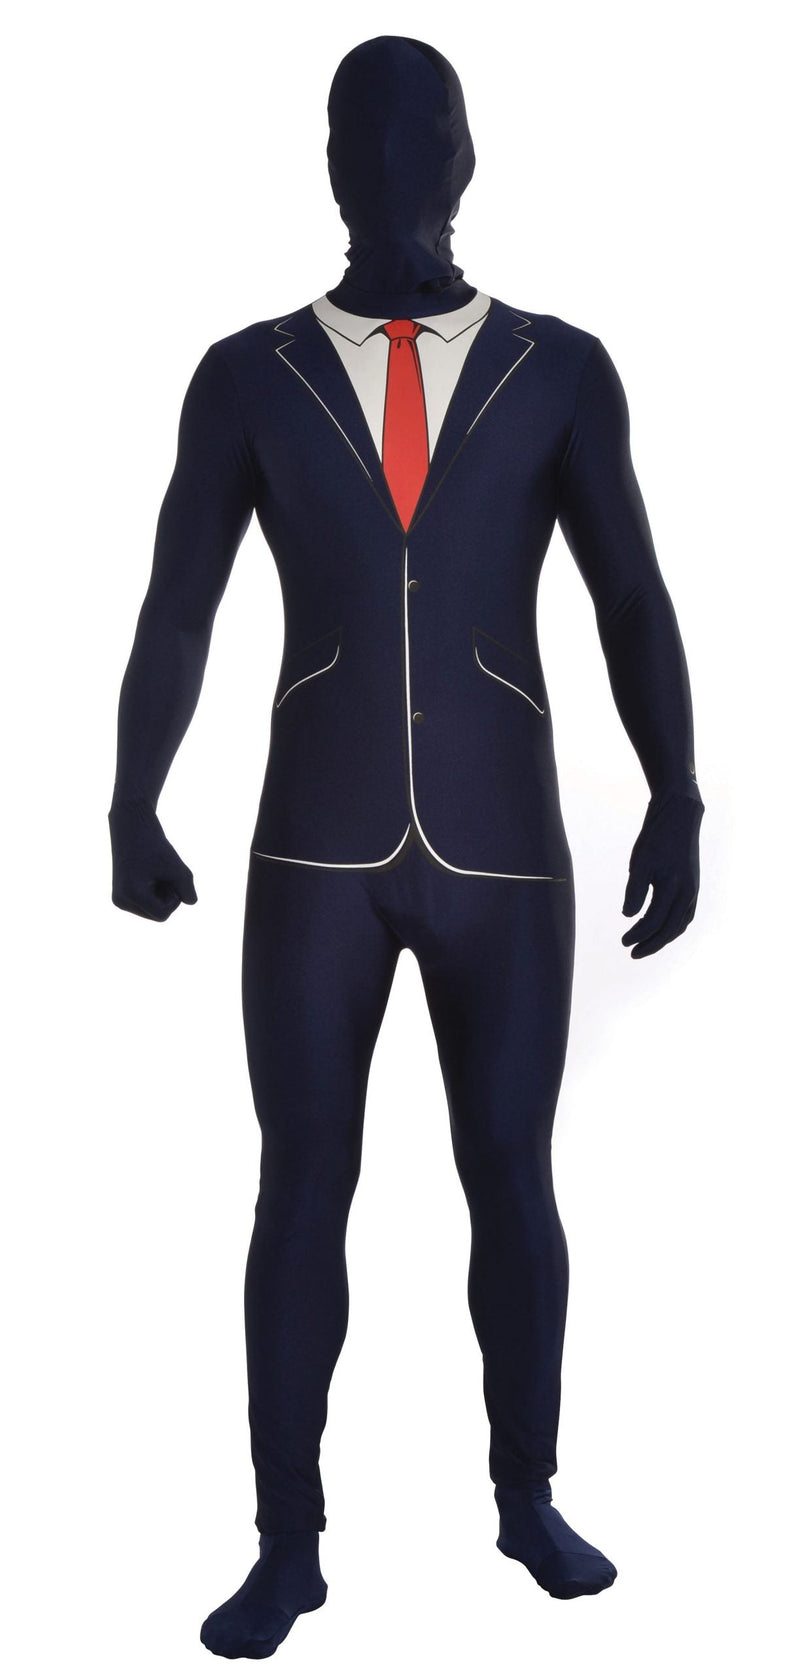 Mens Business Suit Disappearing Man Adult Costume Male Halloween_1 AC608